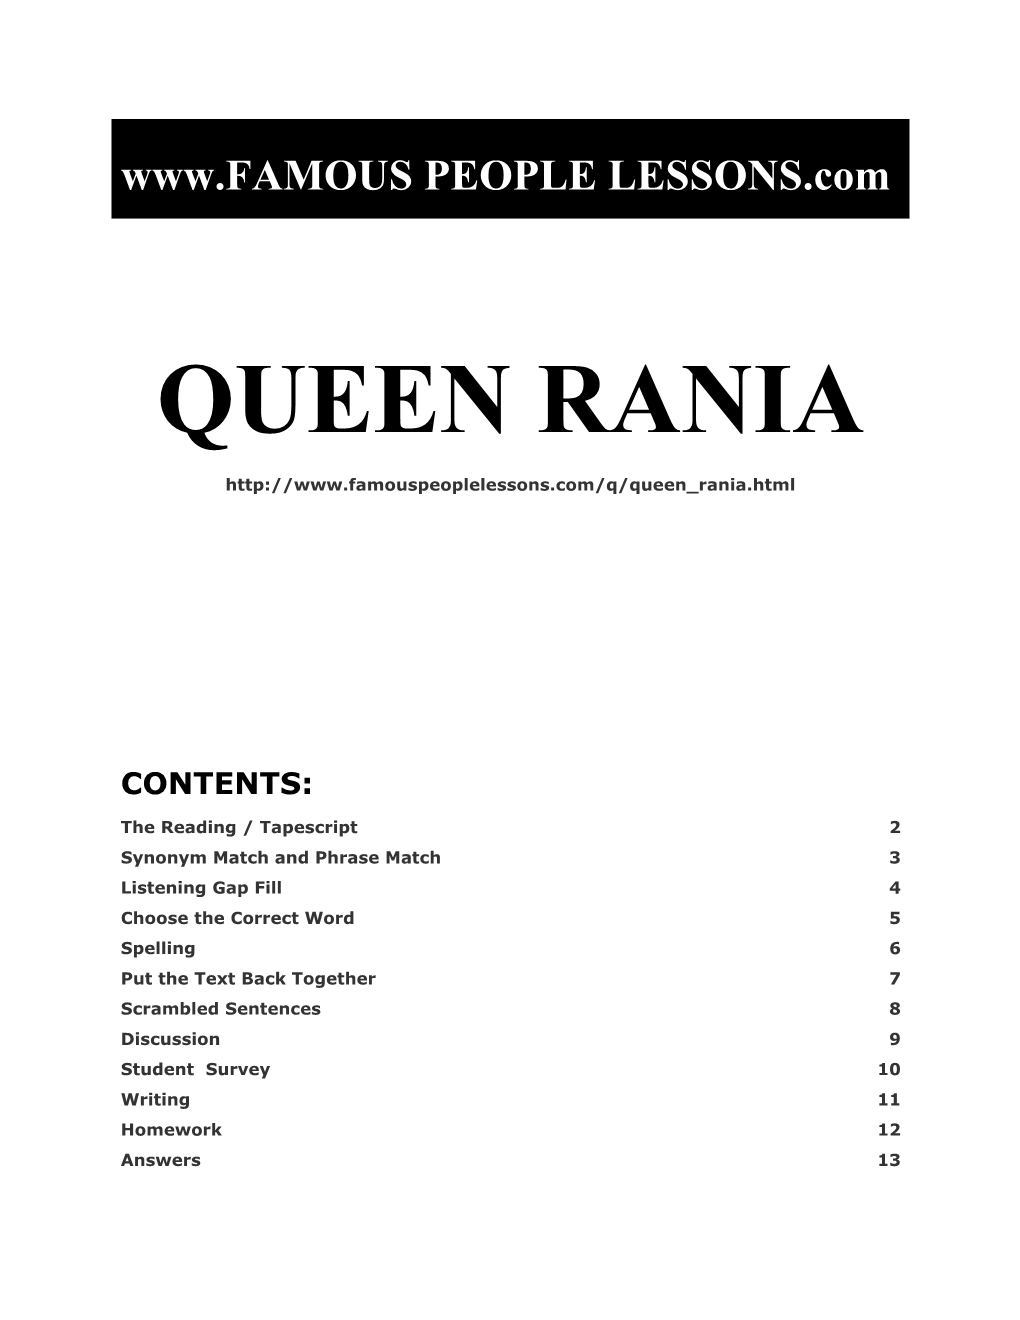 Famous People Lessons - Queen Rania